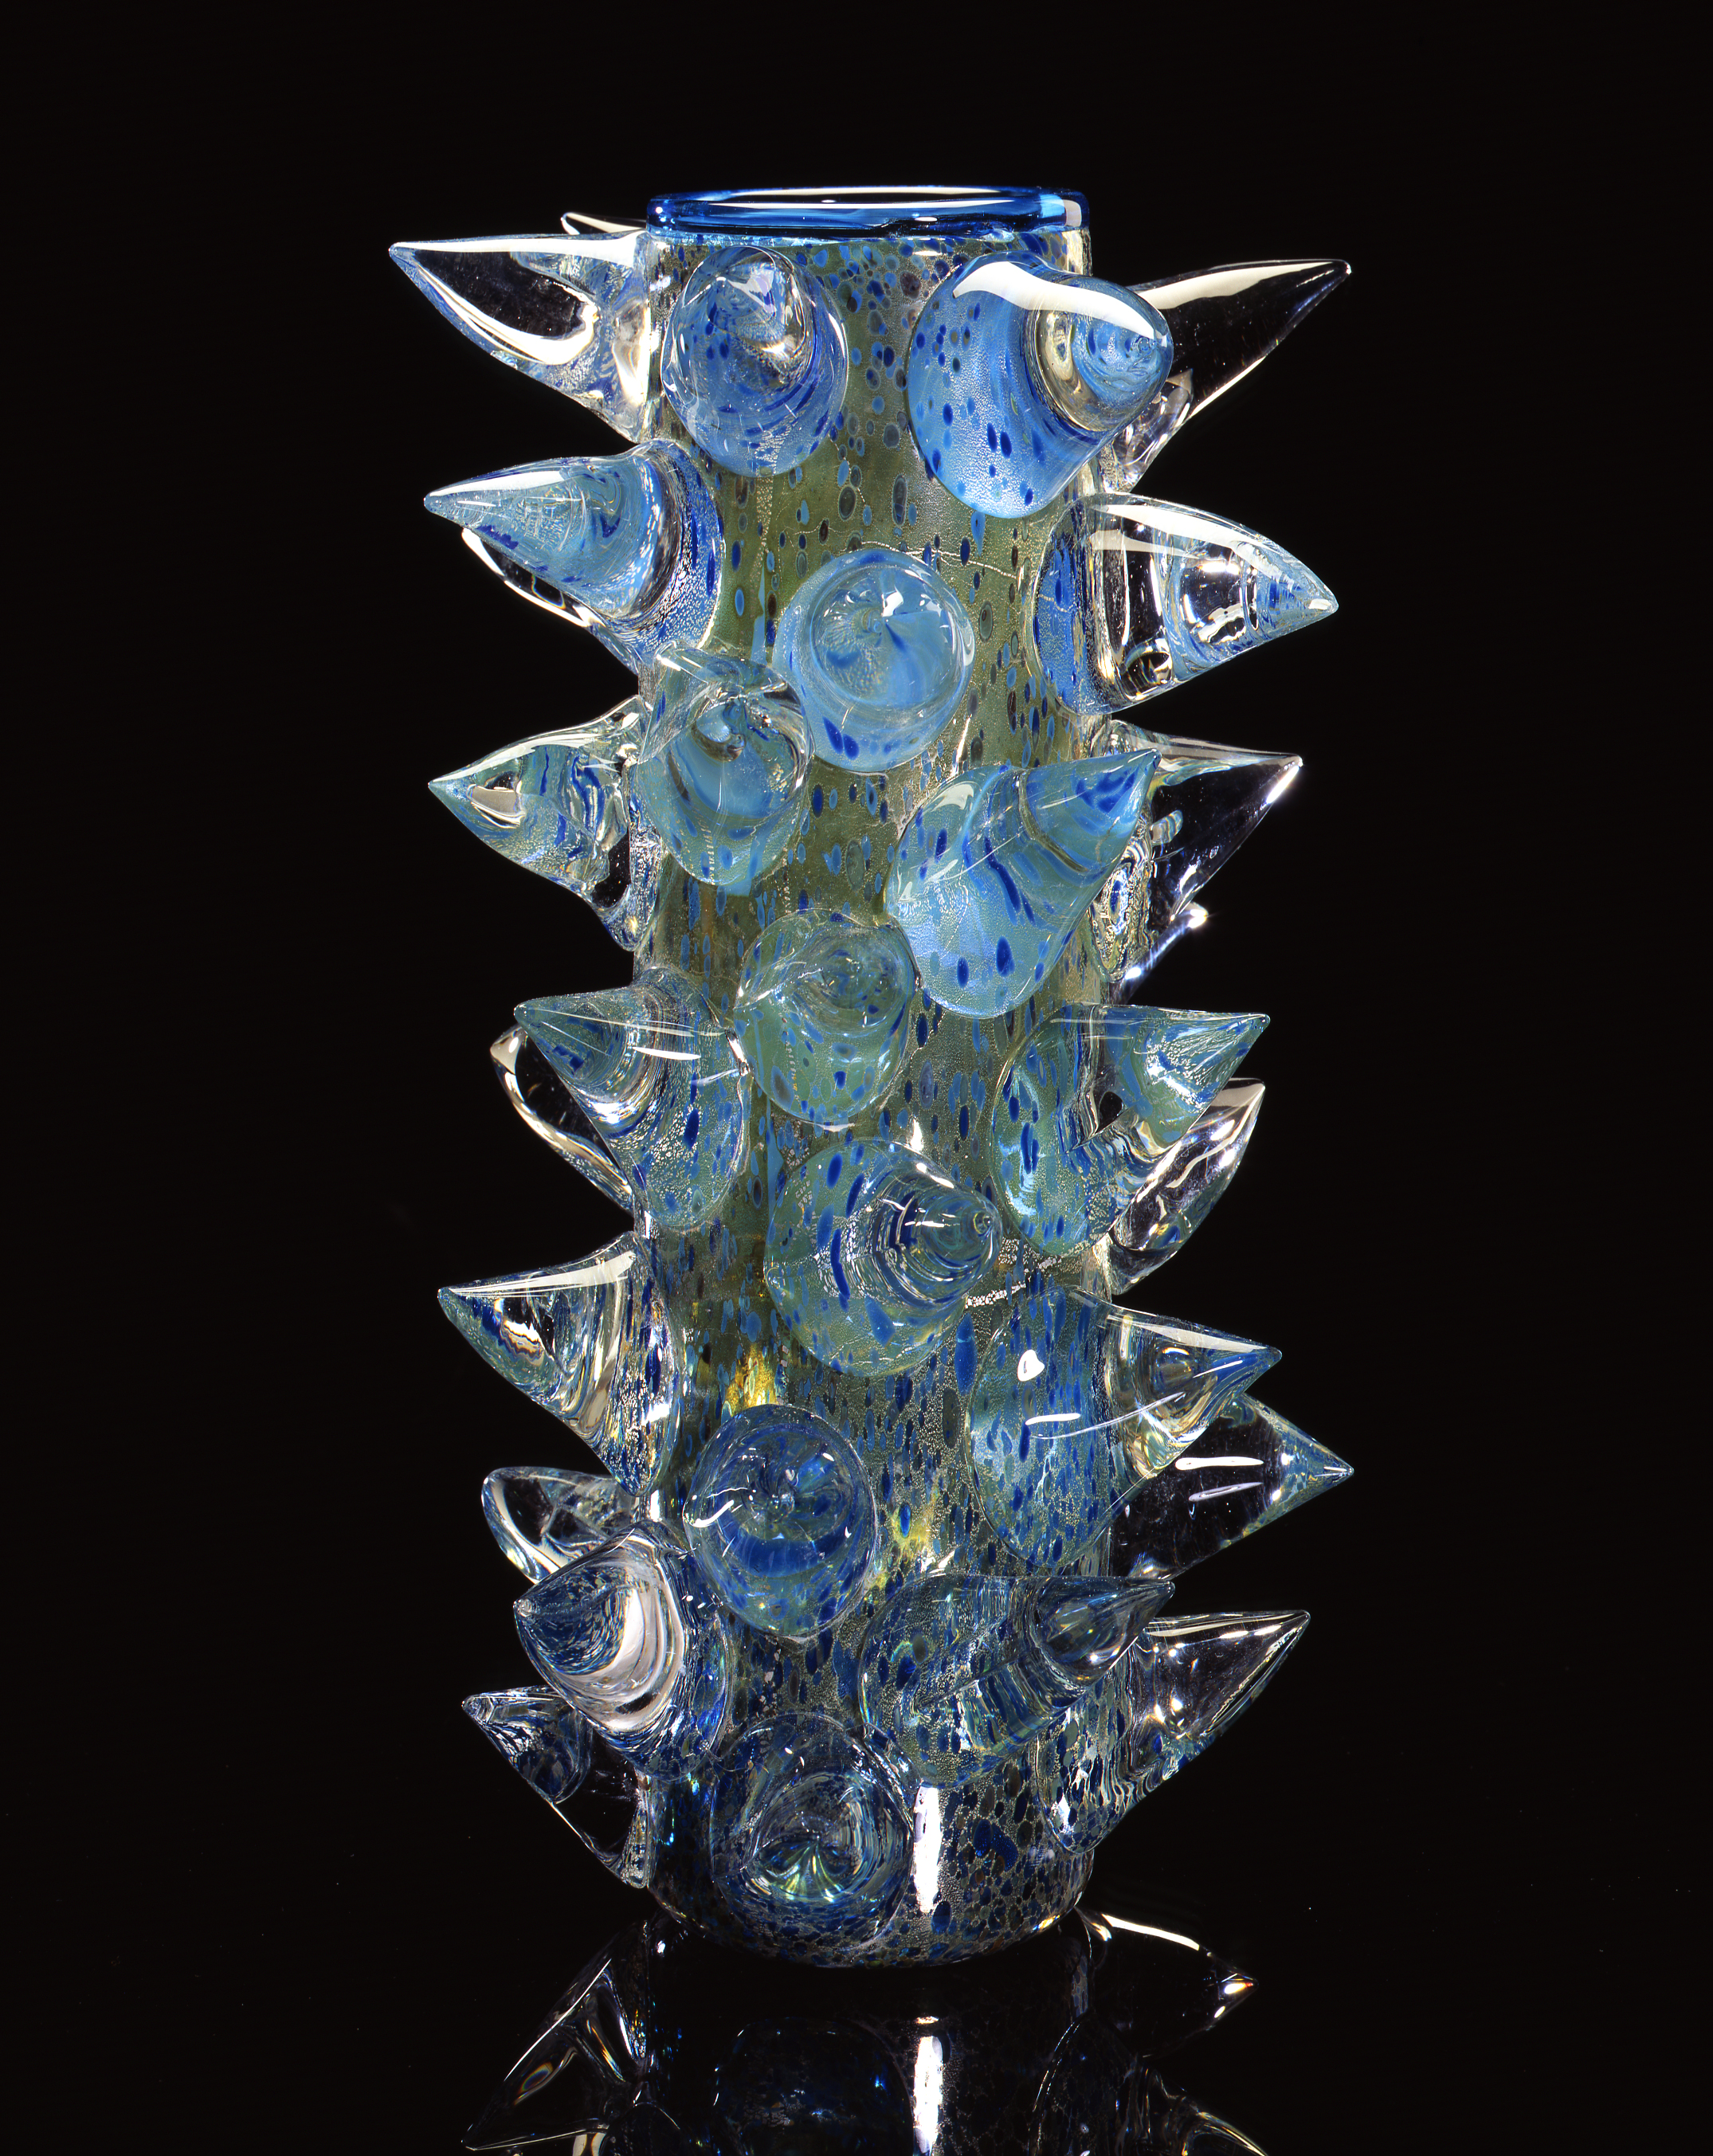  Dale Chihuly,&nbsp; Silver over Starlight Blue Piccolo Venetian with Clear Prunts &nbsp;(1994, glass, 10 x 6 x 6 inches) 